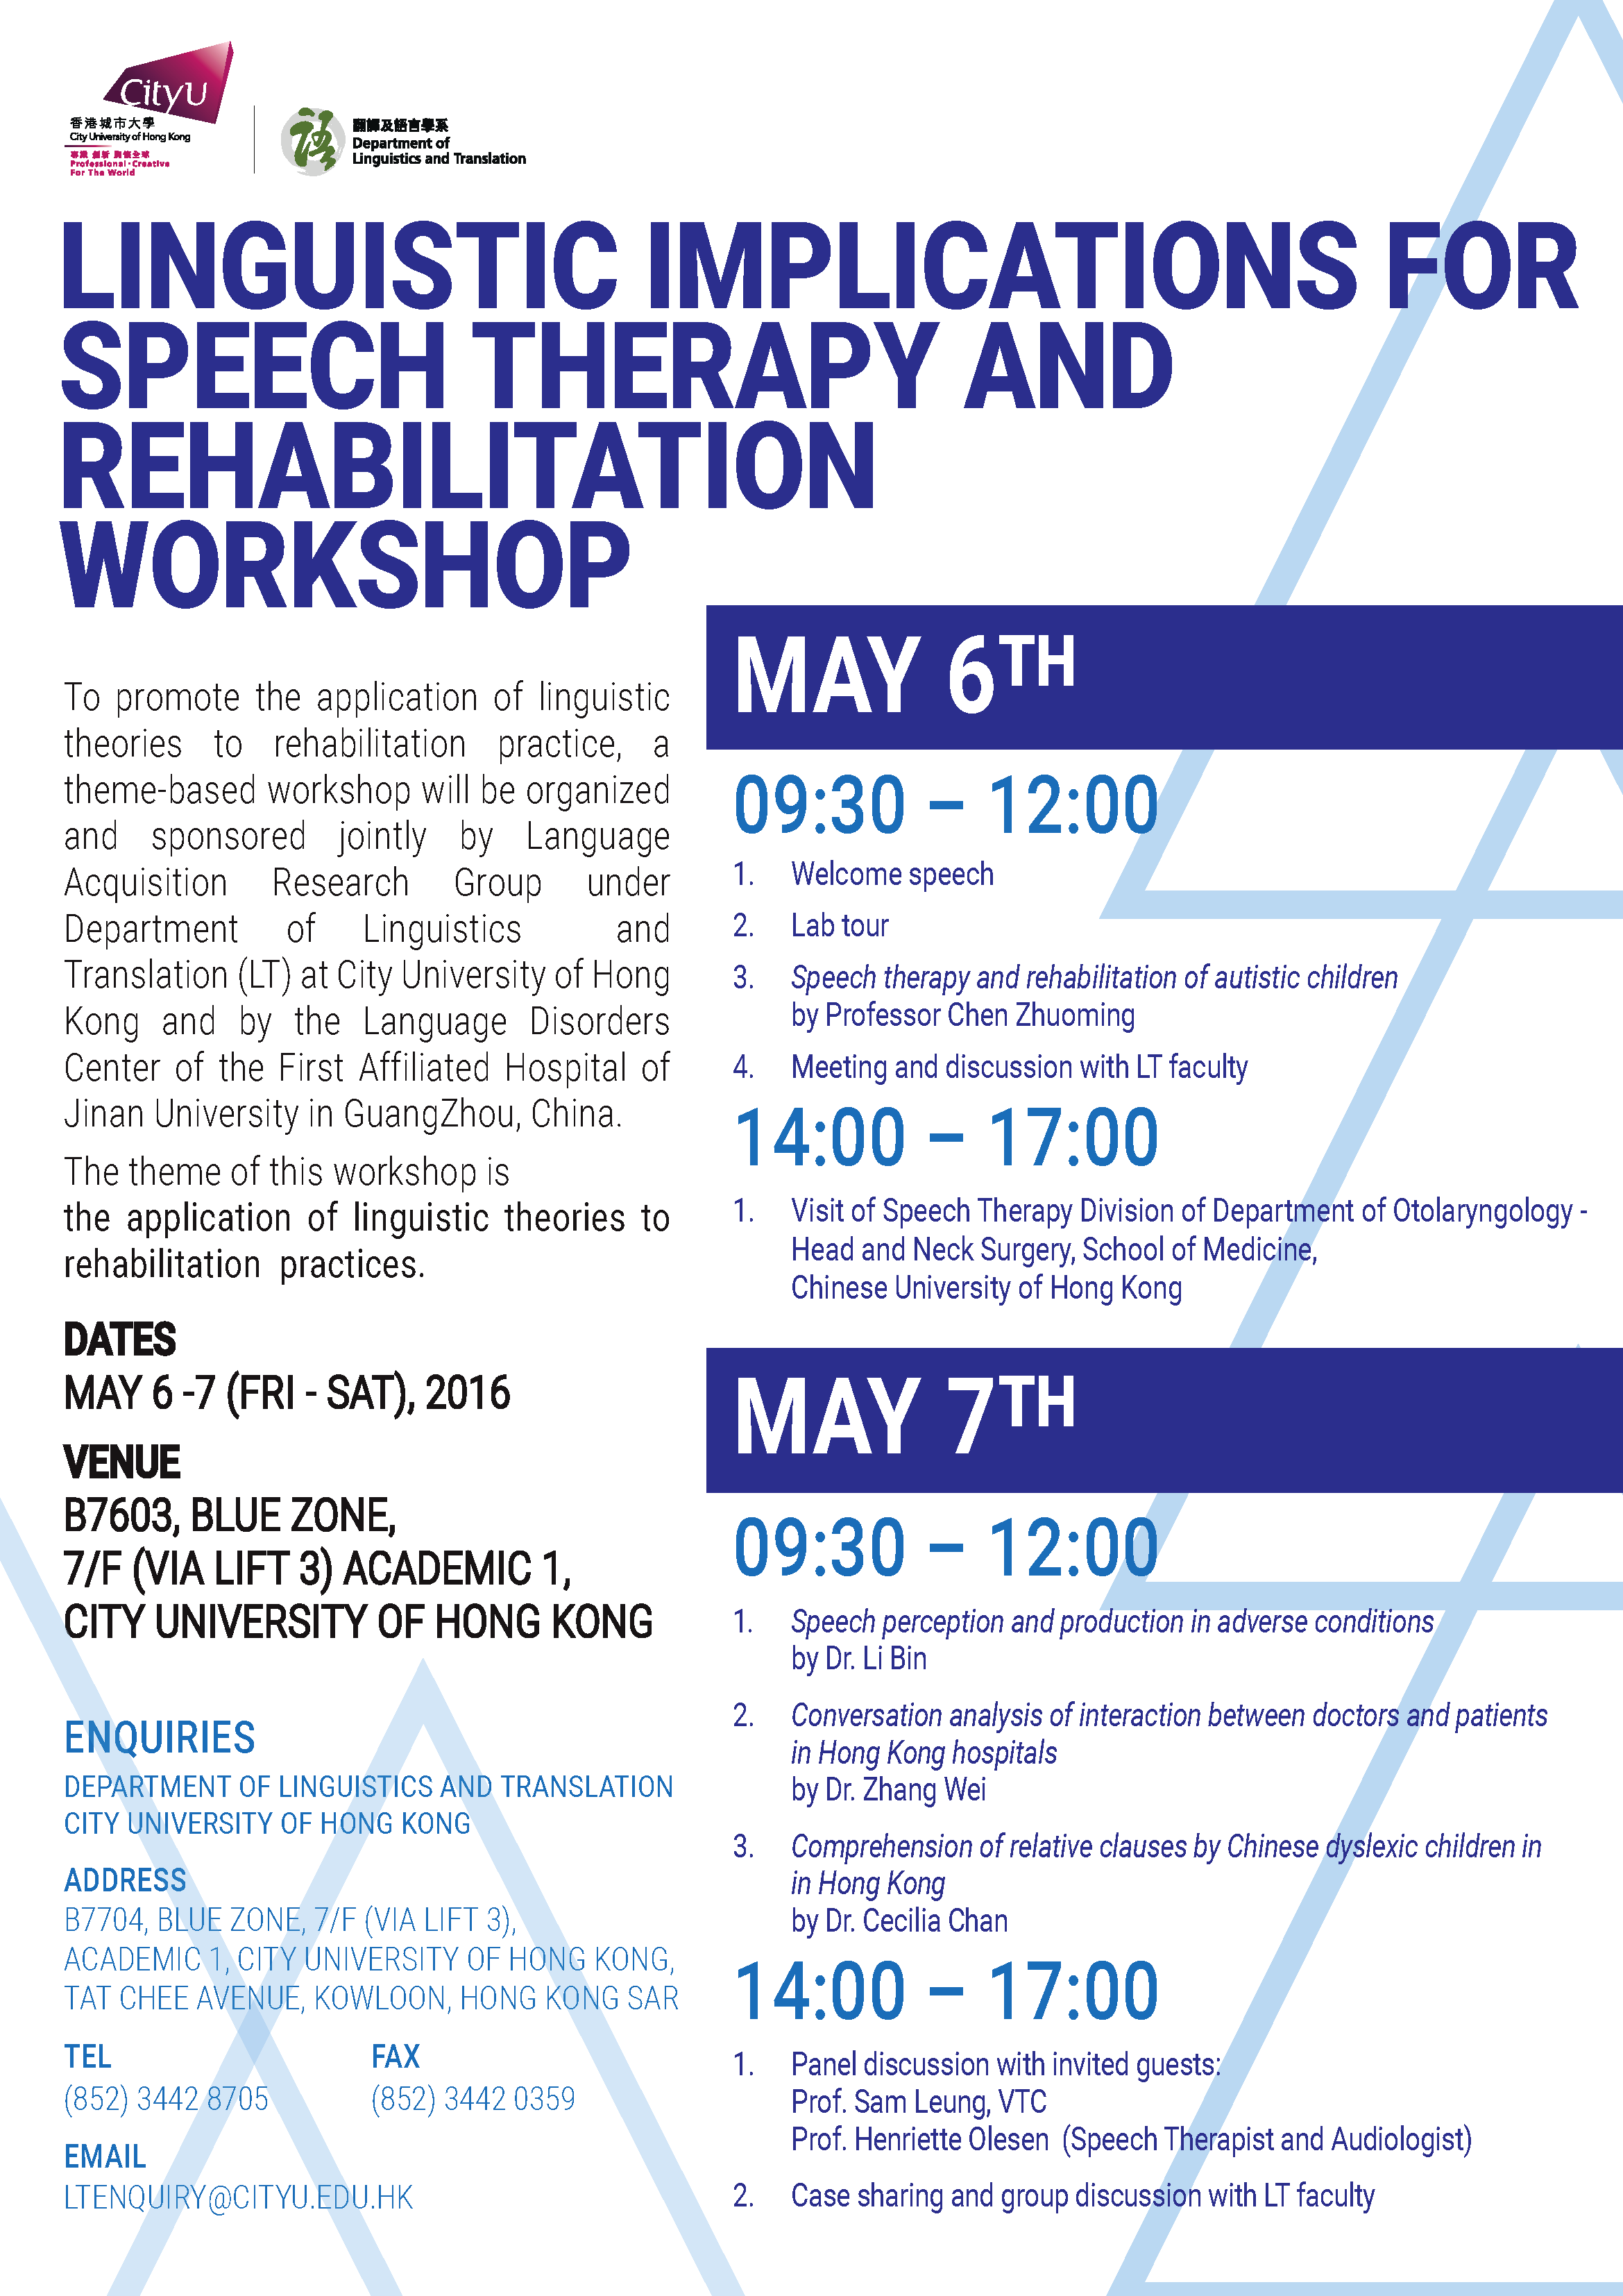 Linguistic Implications for Speech Therapy and Rehabilitation Workshop